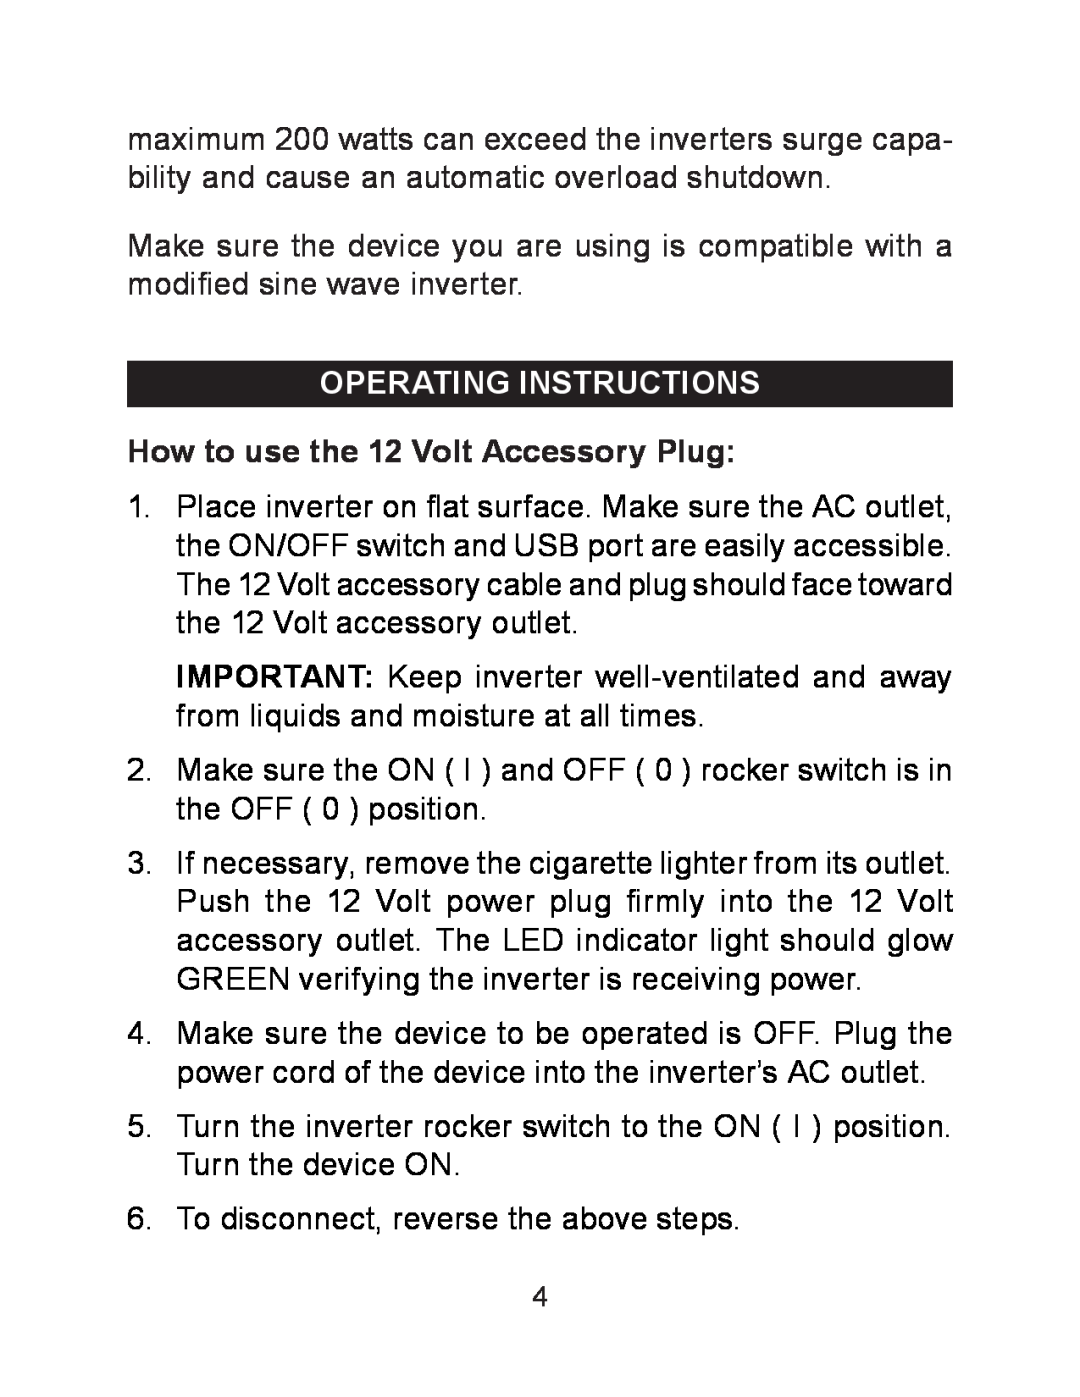 Schumacher PID-200 owner manual Operating Instructions, How to use the 12 Volt Accessory Plug 